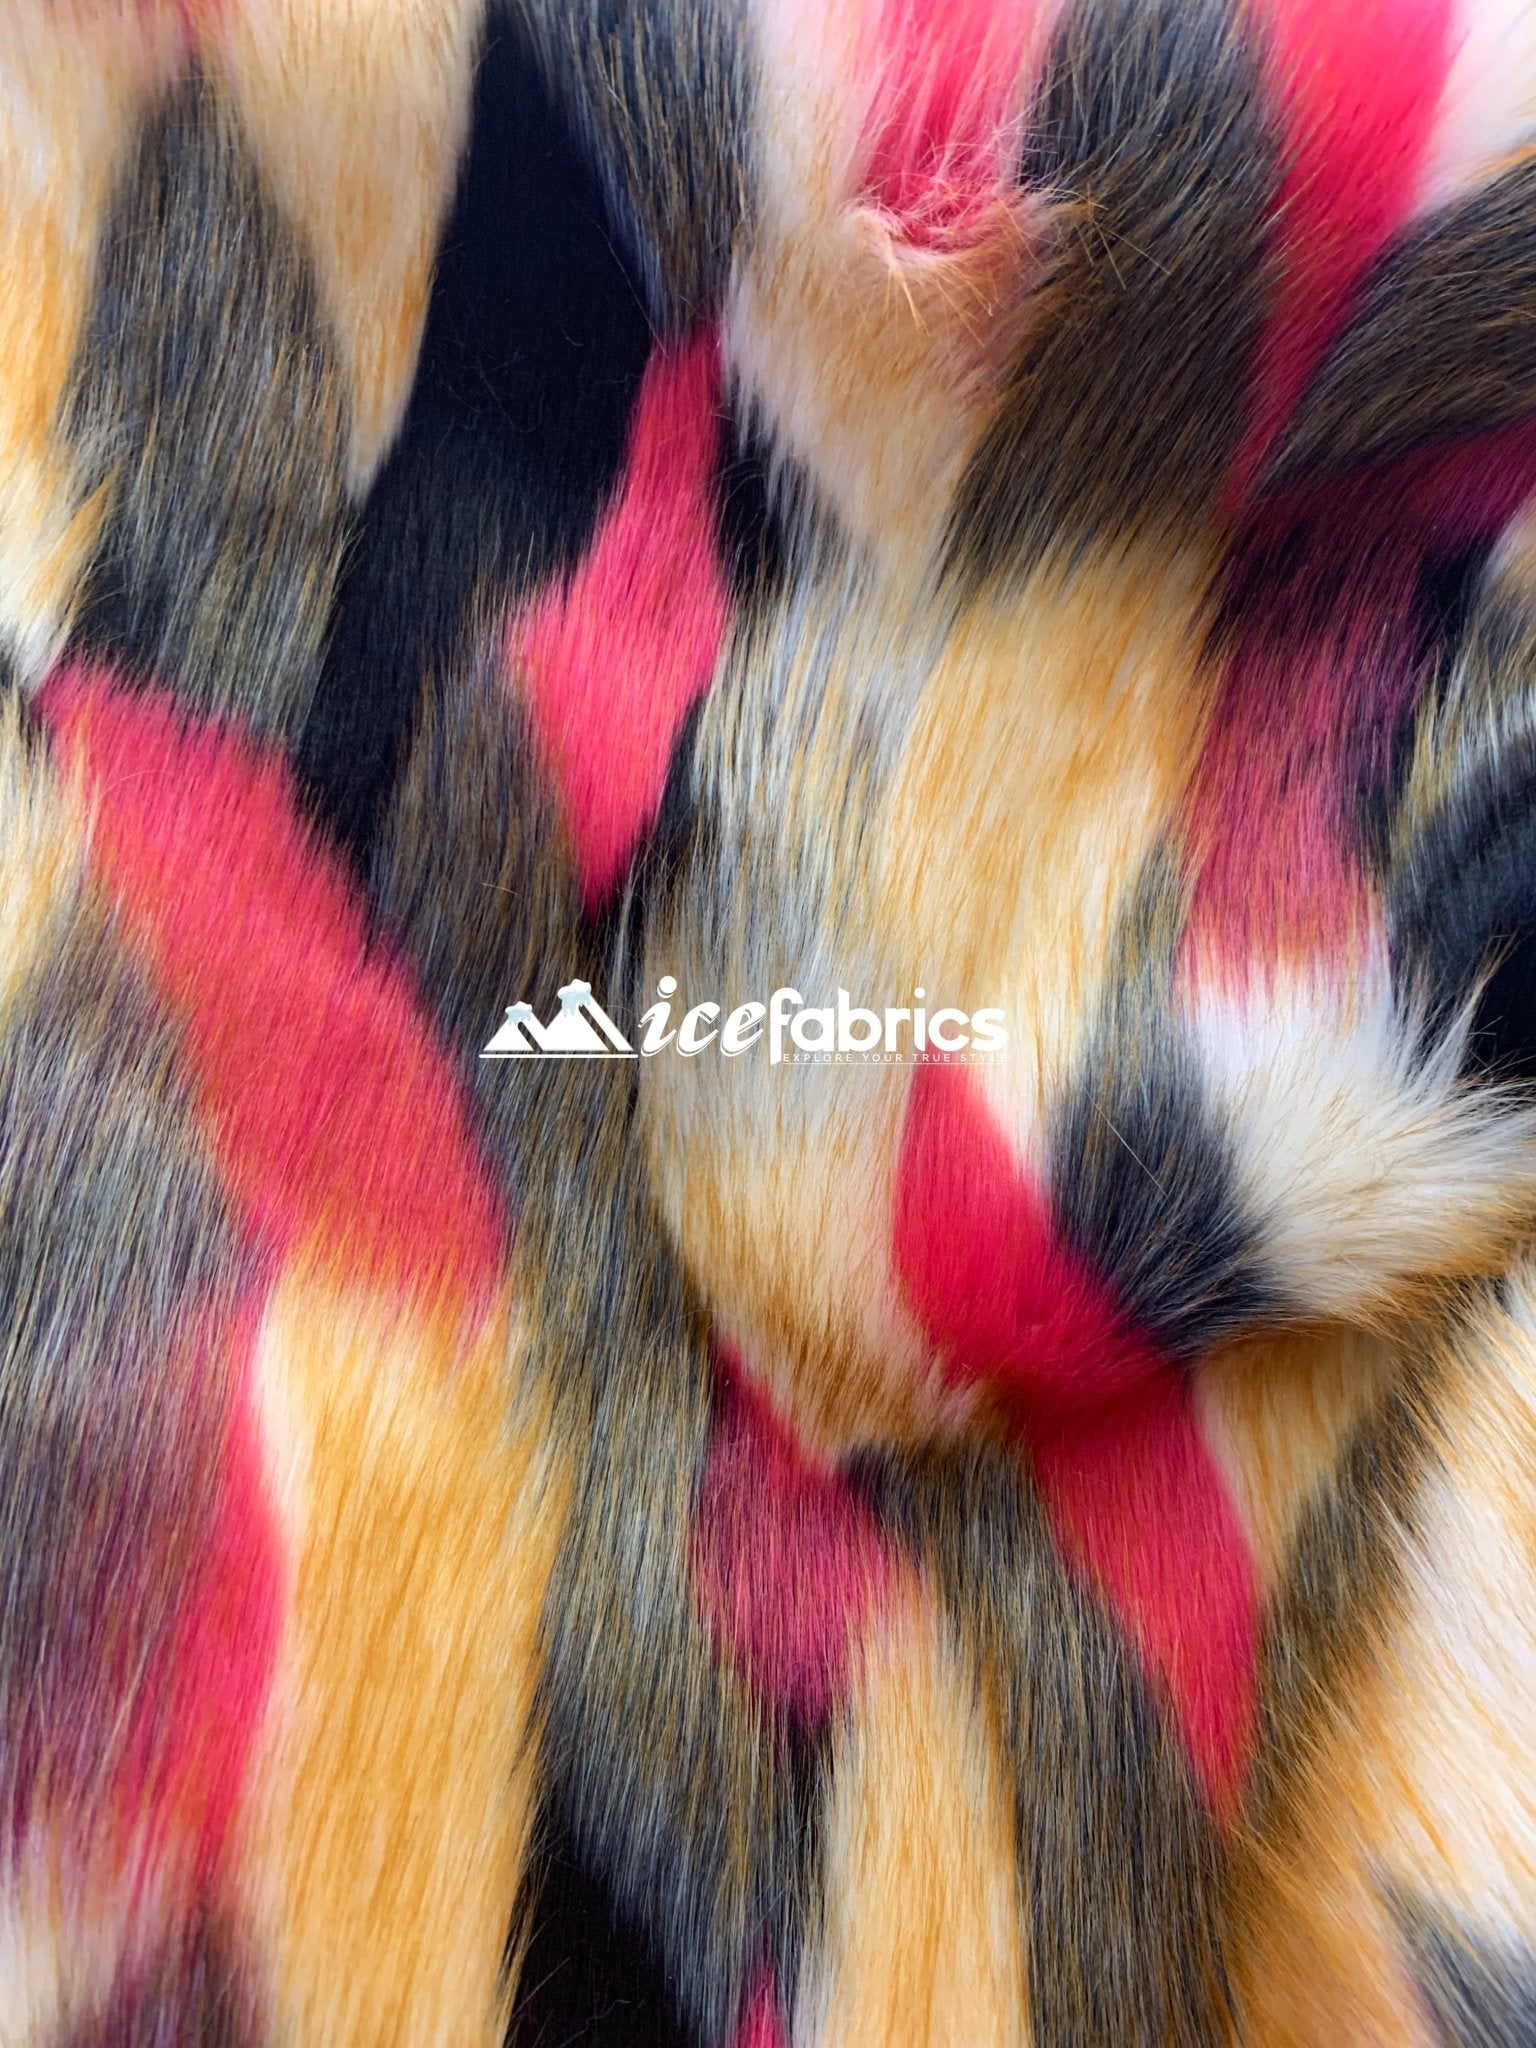 Fashion Fabric Black, Brown, Coral and Gray Multicolor Faux Fur Material By The YardICEFABRICICE FABRICSBy The Yard (60 inches Wide)Fashion Fabric Black, Brown, Coral and Gray Multicolor Faux Fur Material By The Yard ICEFABRIC